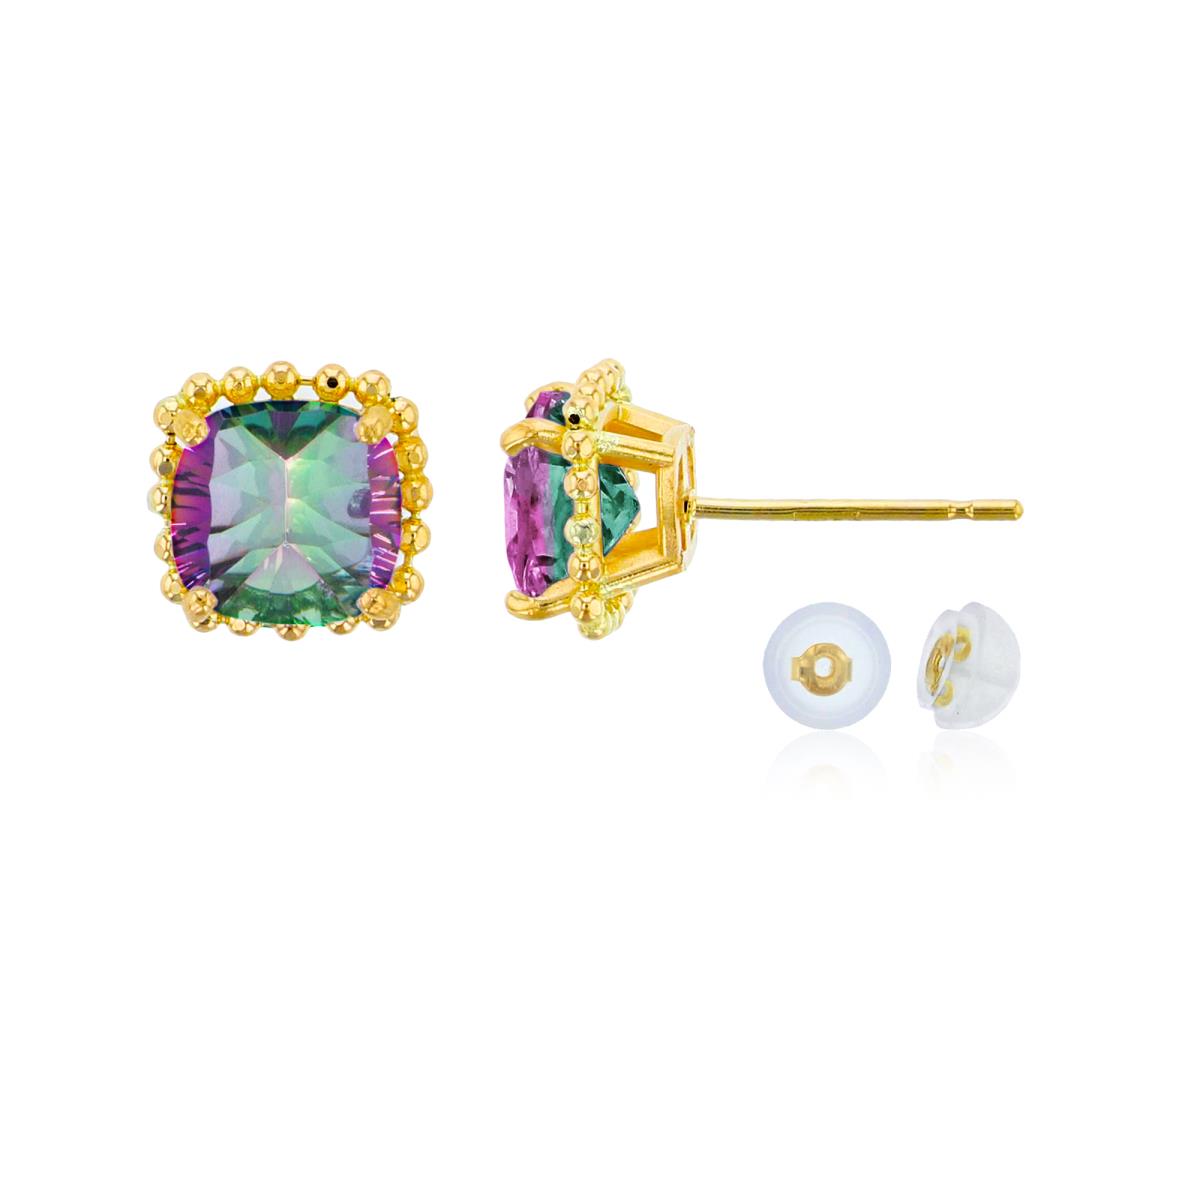 14K Yellow Gold 6x6mm Cushion Cut Mystic Green Topaz Bead Frame Stud Earring with Silicone Back